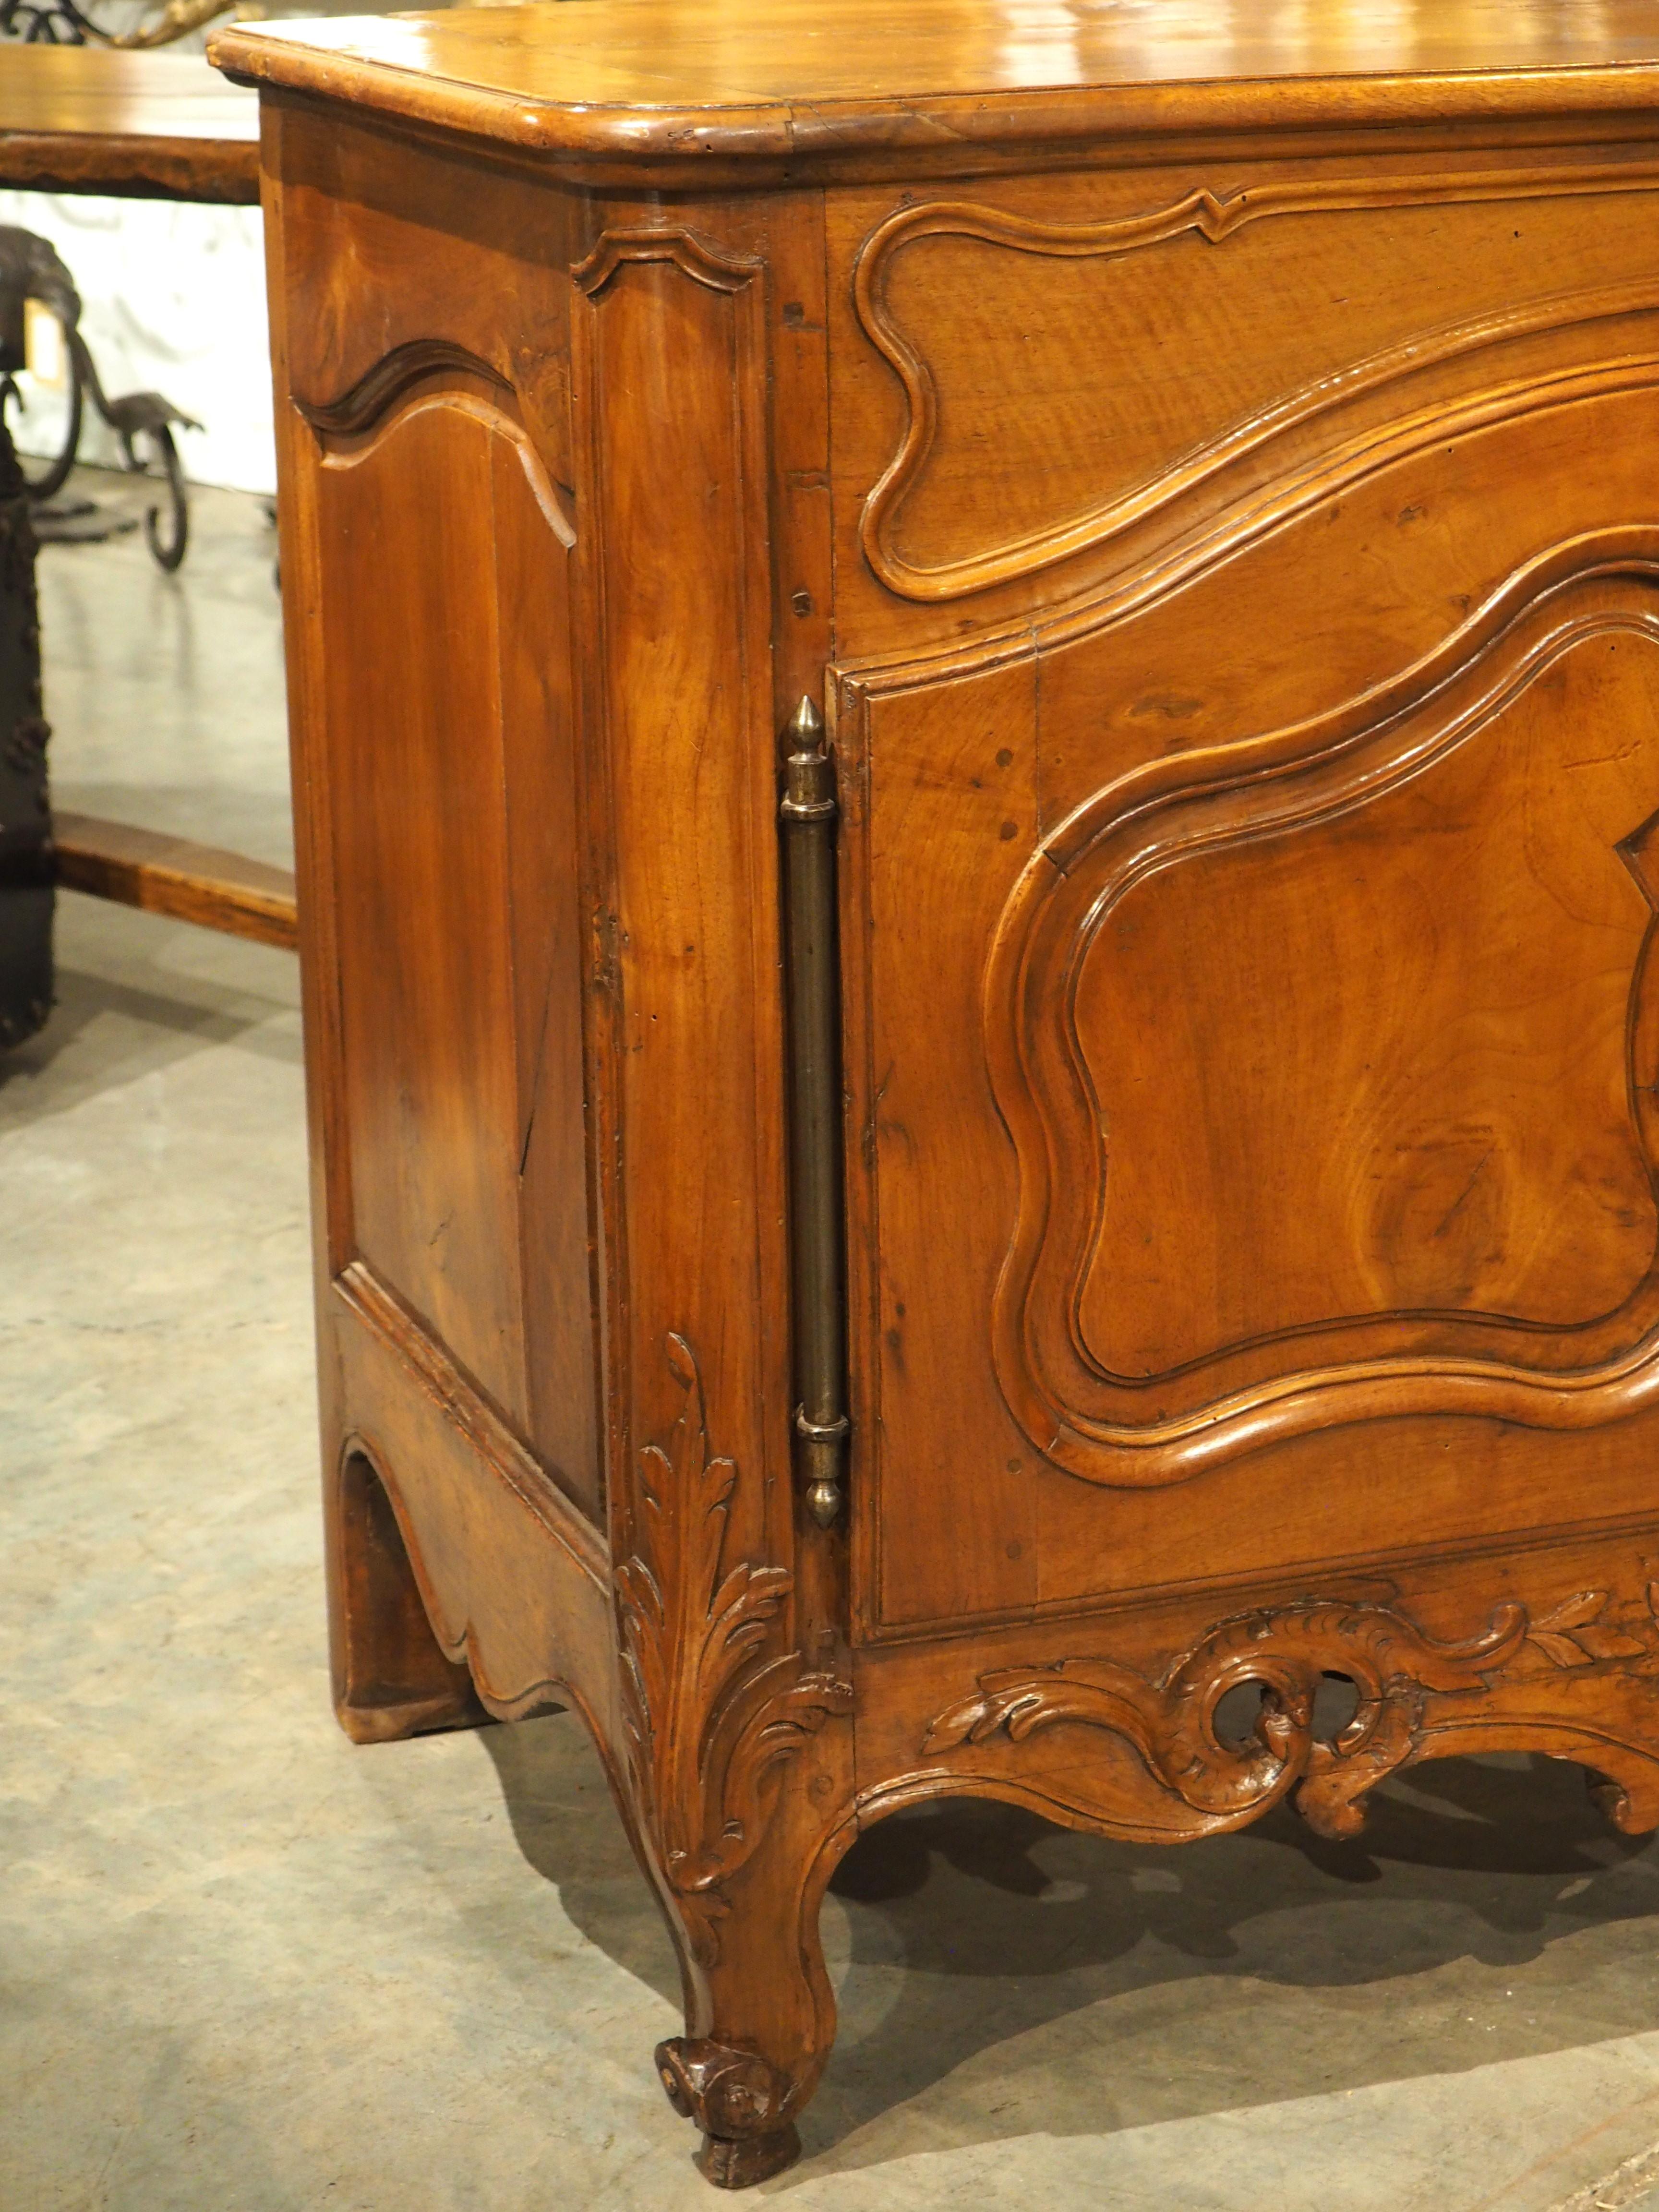 Circa 1750 Carved Walnut Wood Buffet Crédence from Nîmes, France 11